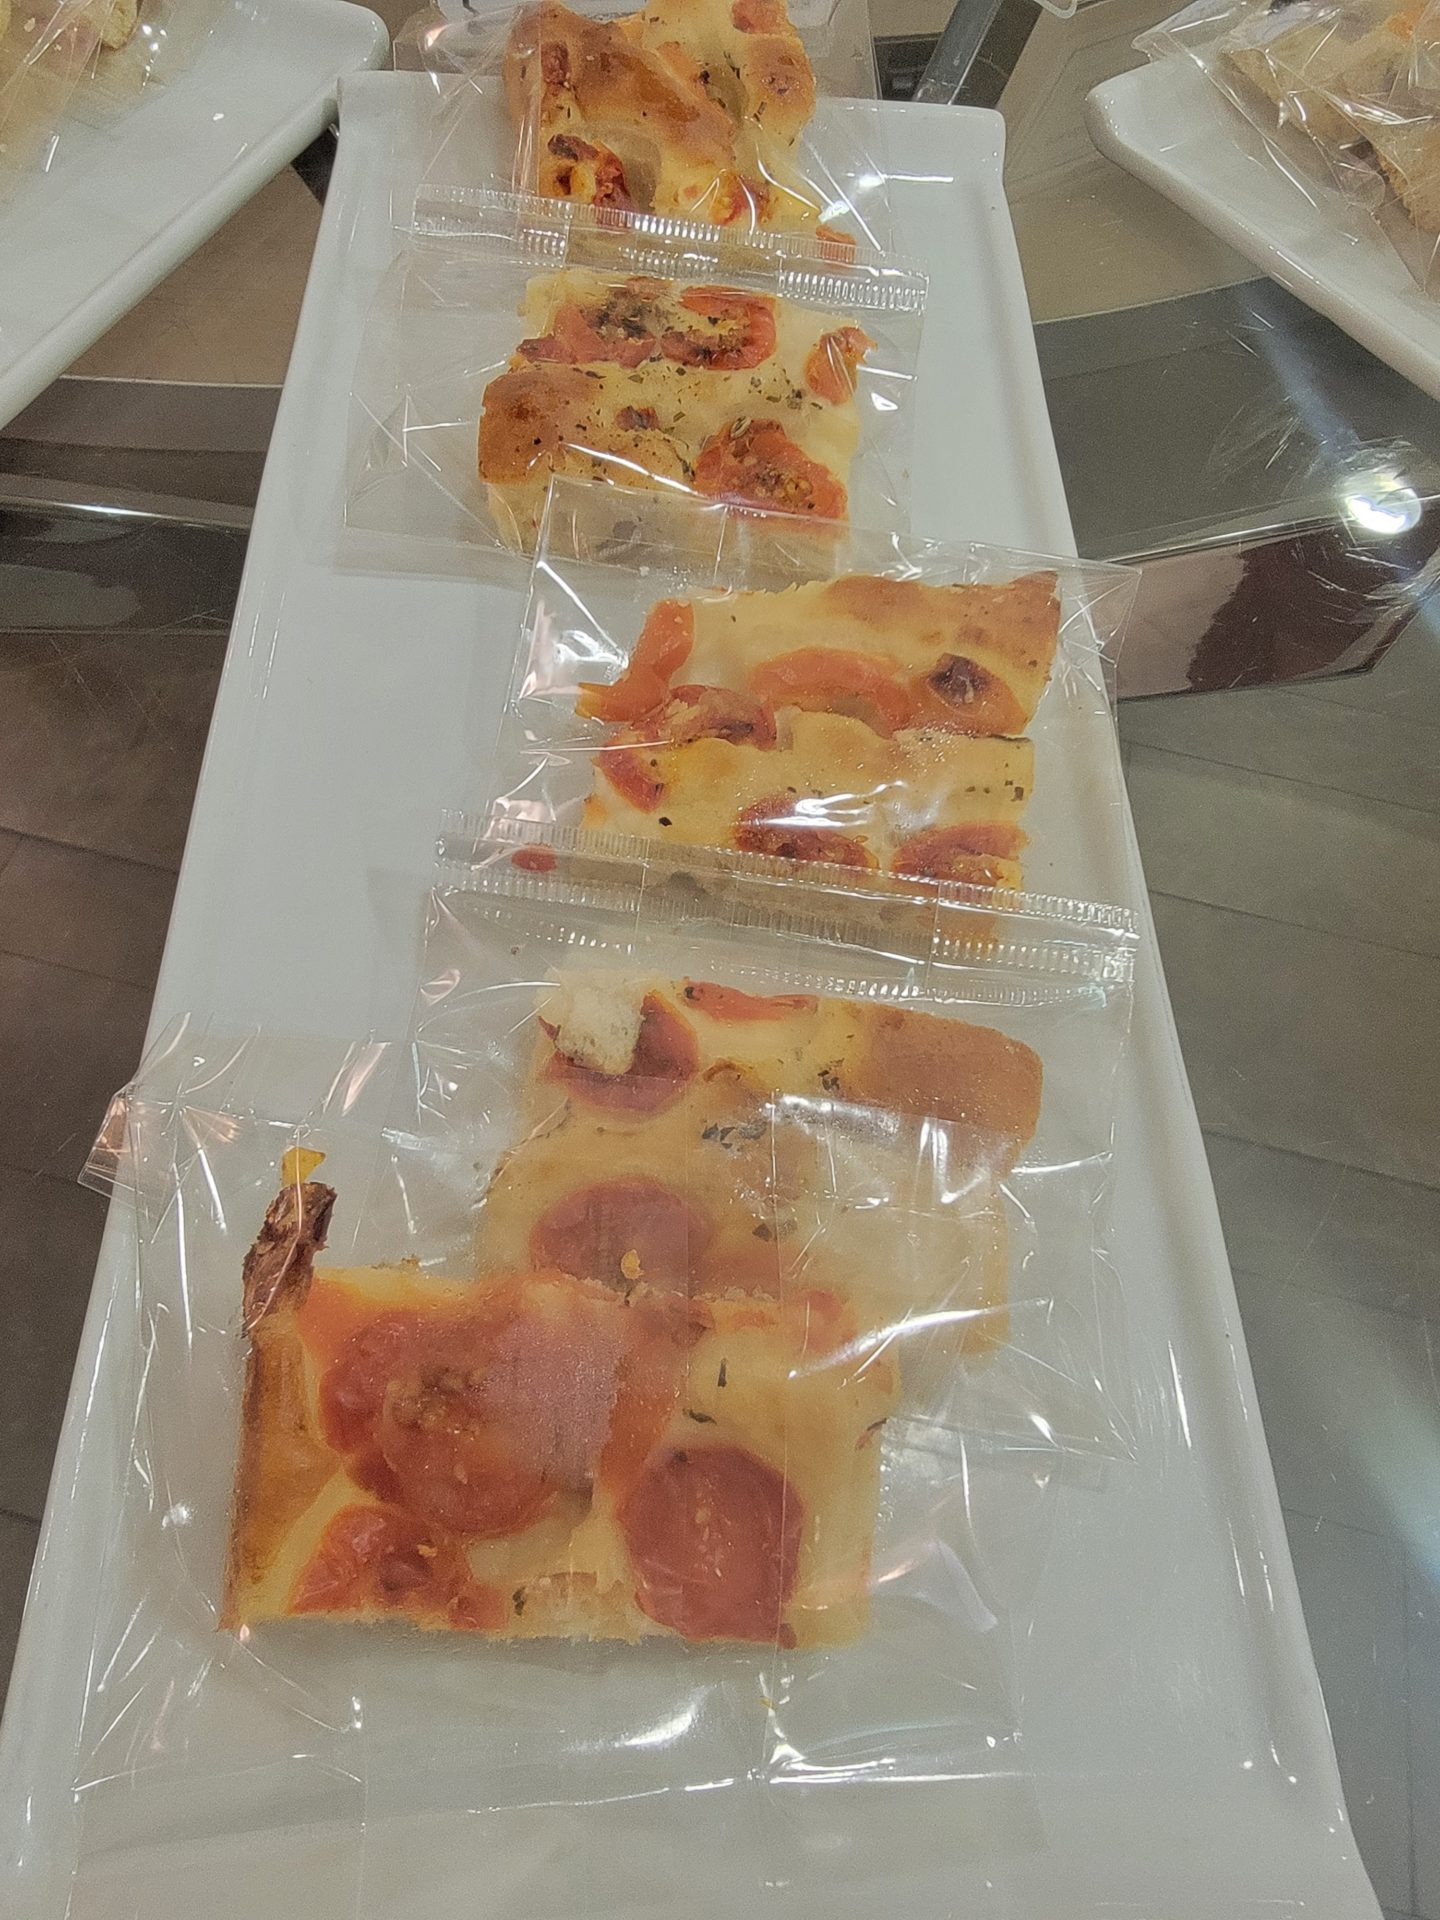 a group of pizzas in plastic bags